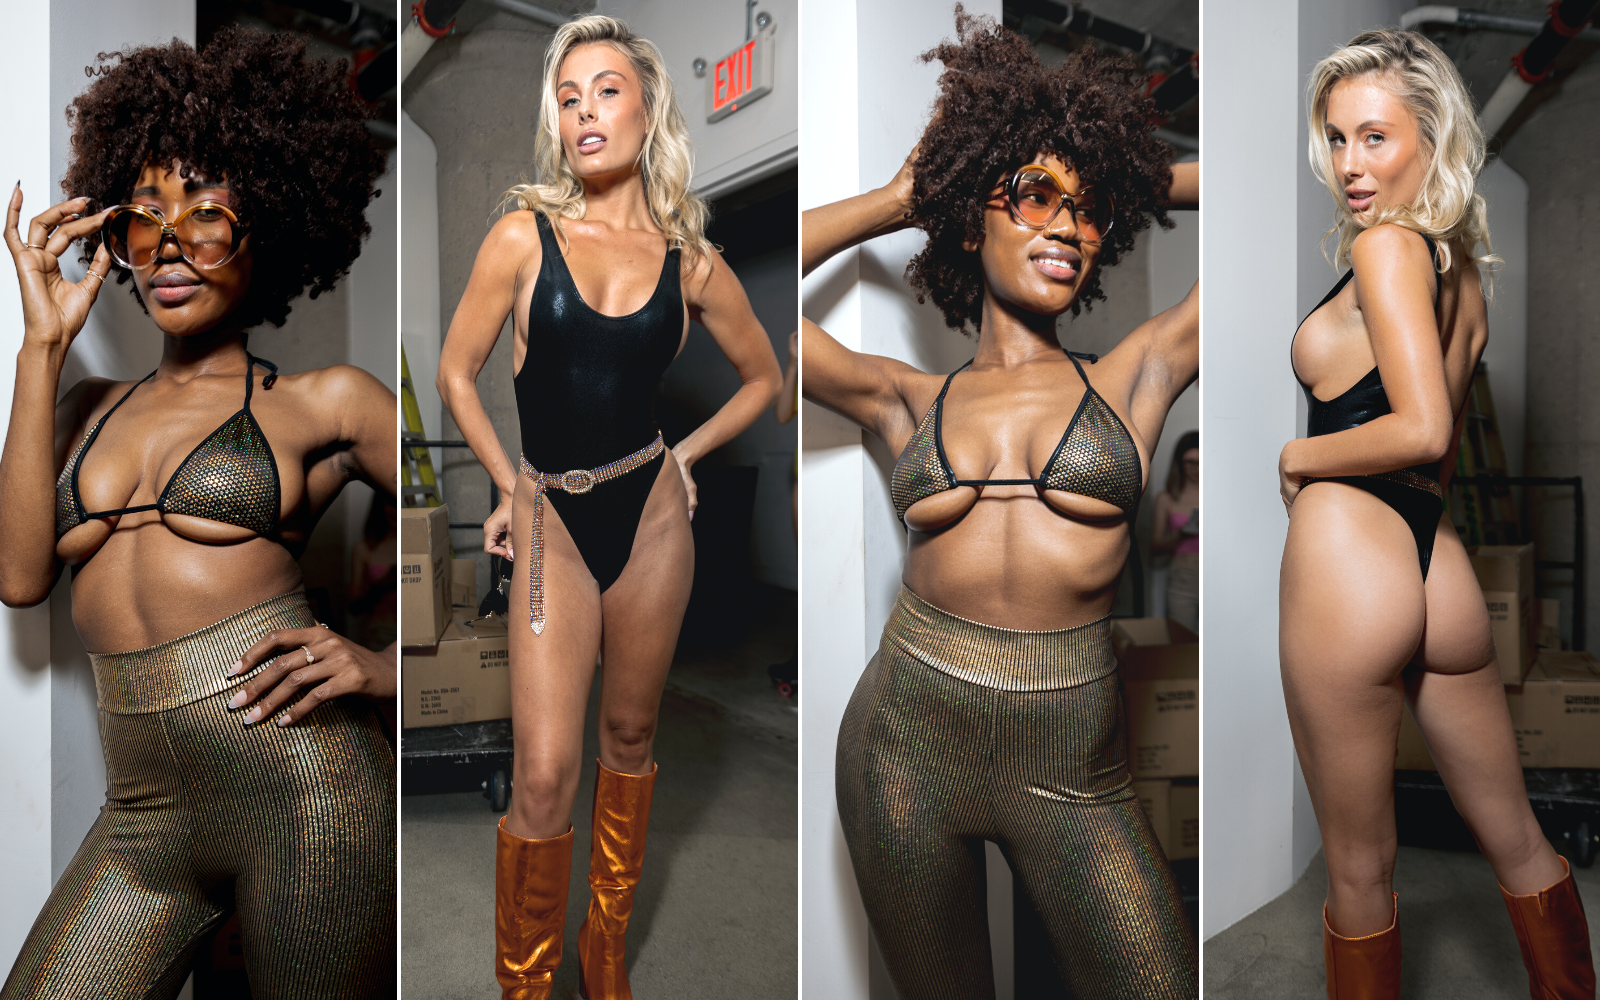 Sugarpuss models caught backstage wearing: HOLOGRAM HIGHCUT TRIANGLE BIKINI IN GOLD with black trim and the HOLOGRAM HIGHCUT SIDEBOOB ONE PIECE IN BLACK